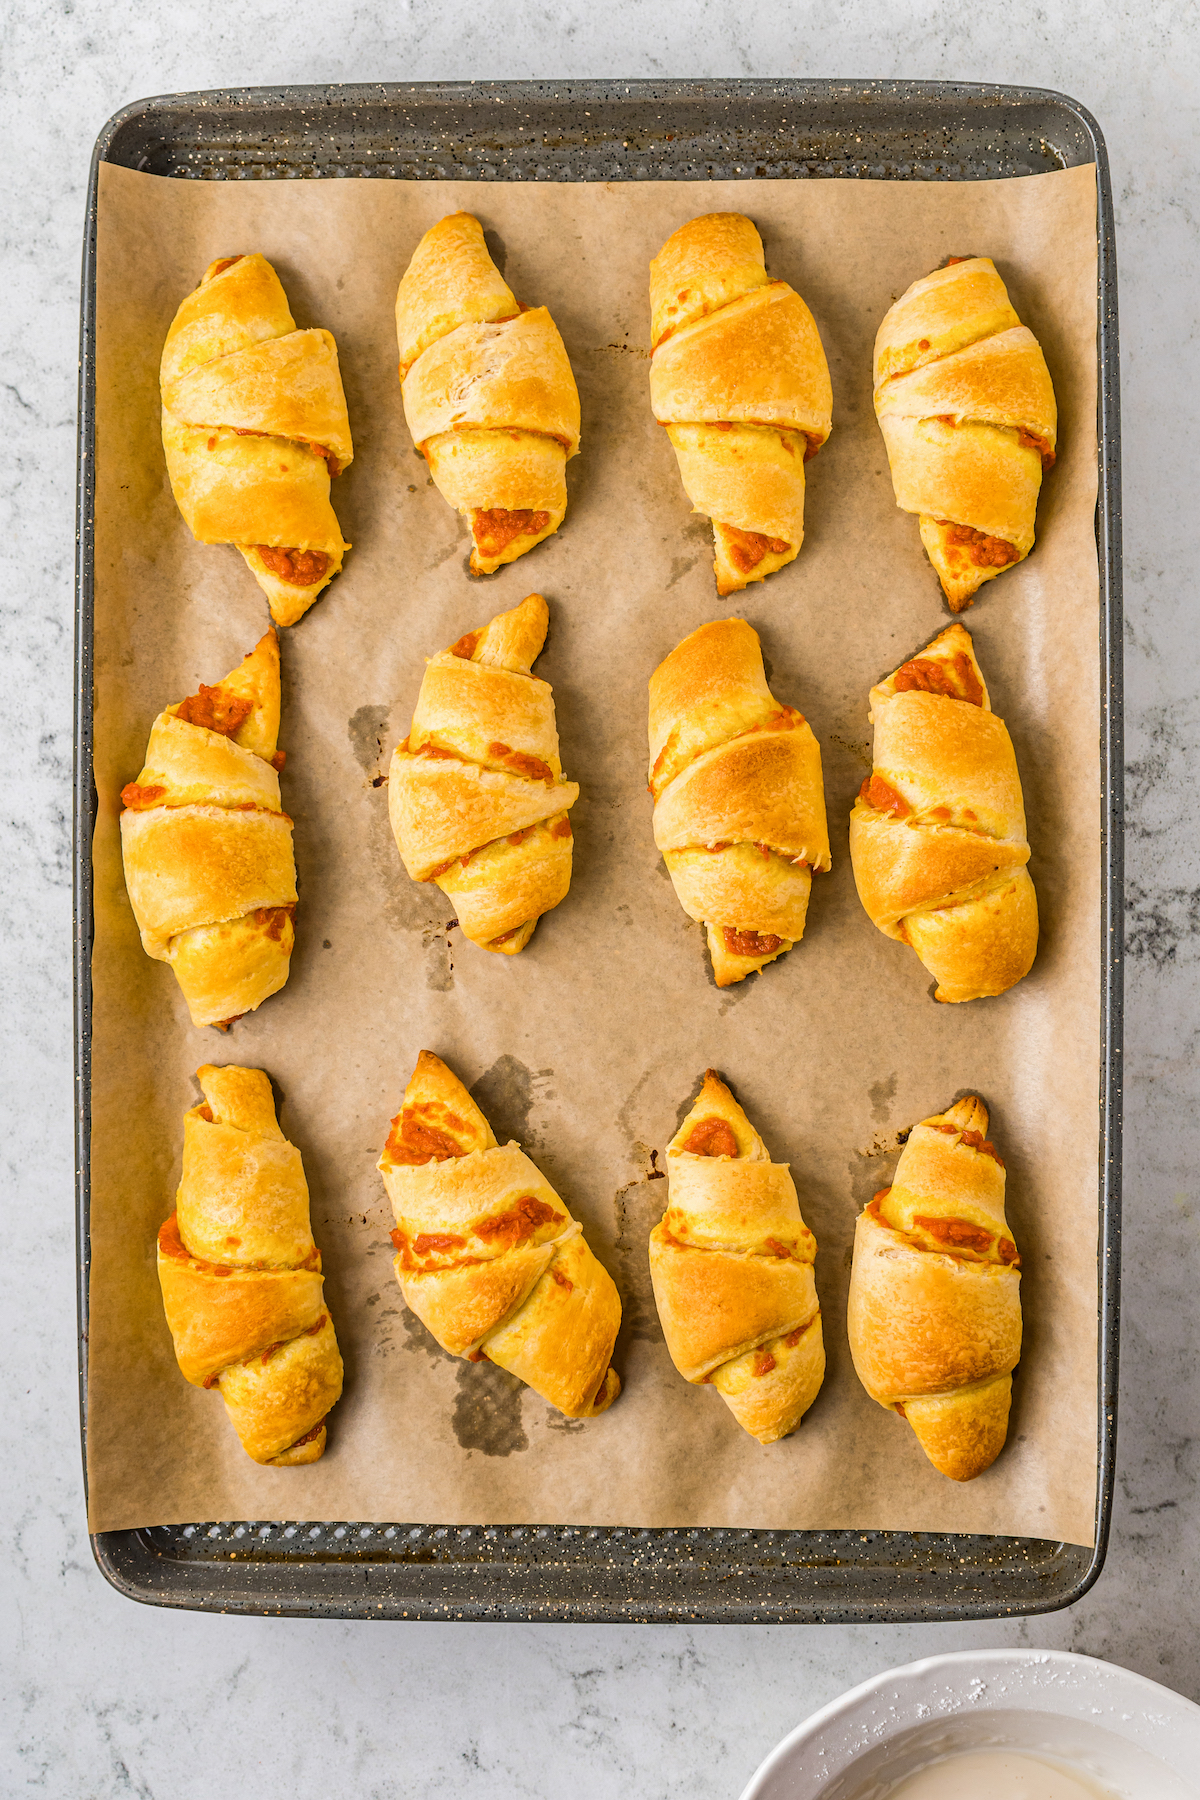 Crescent rolls lined up on a baking sheet with a crispy golden outside and filling showing through.